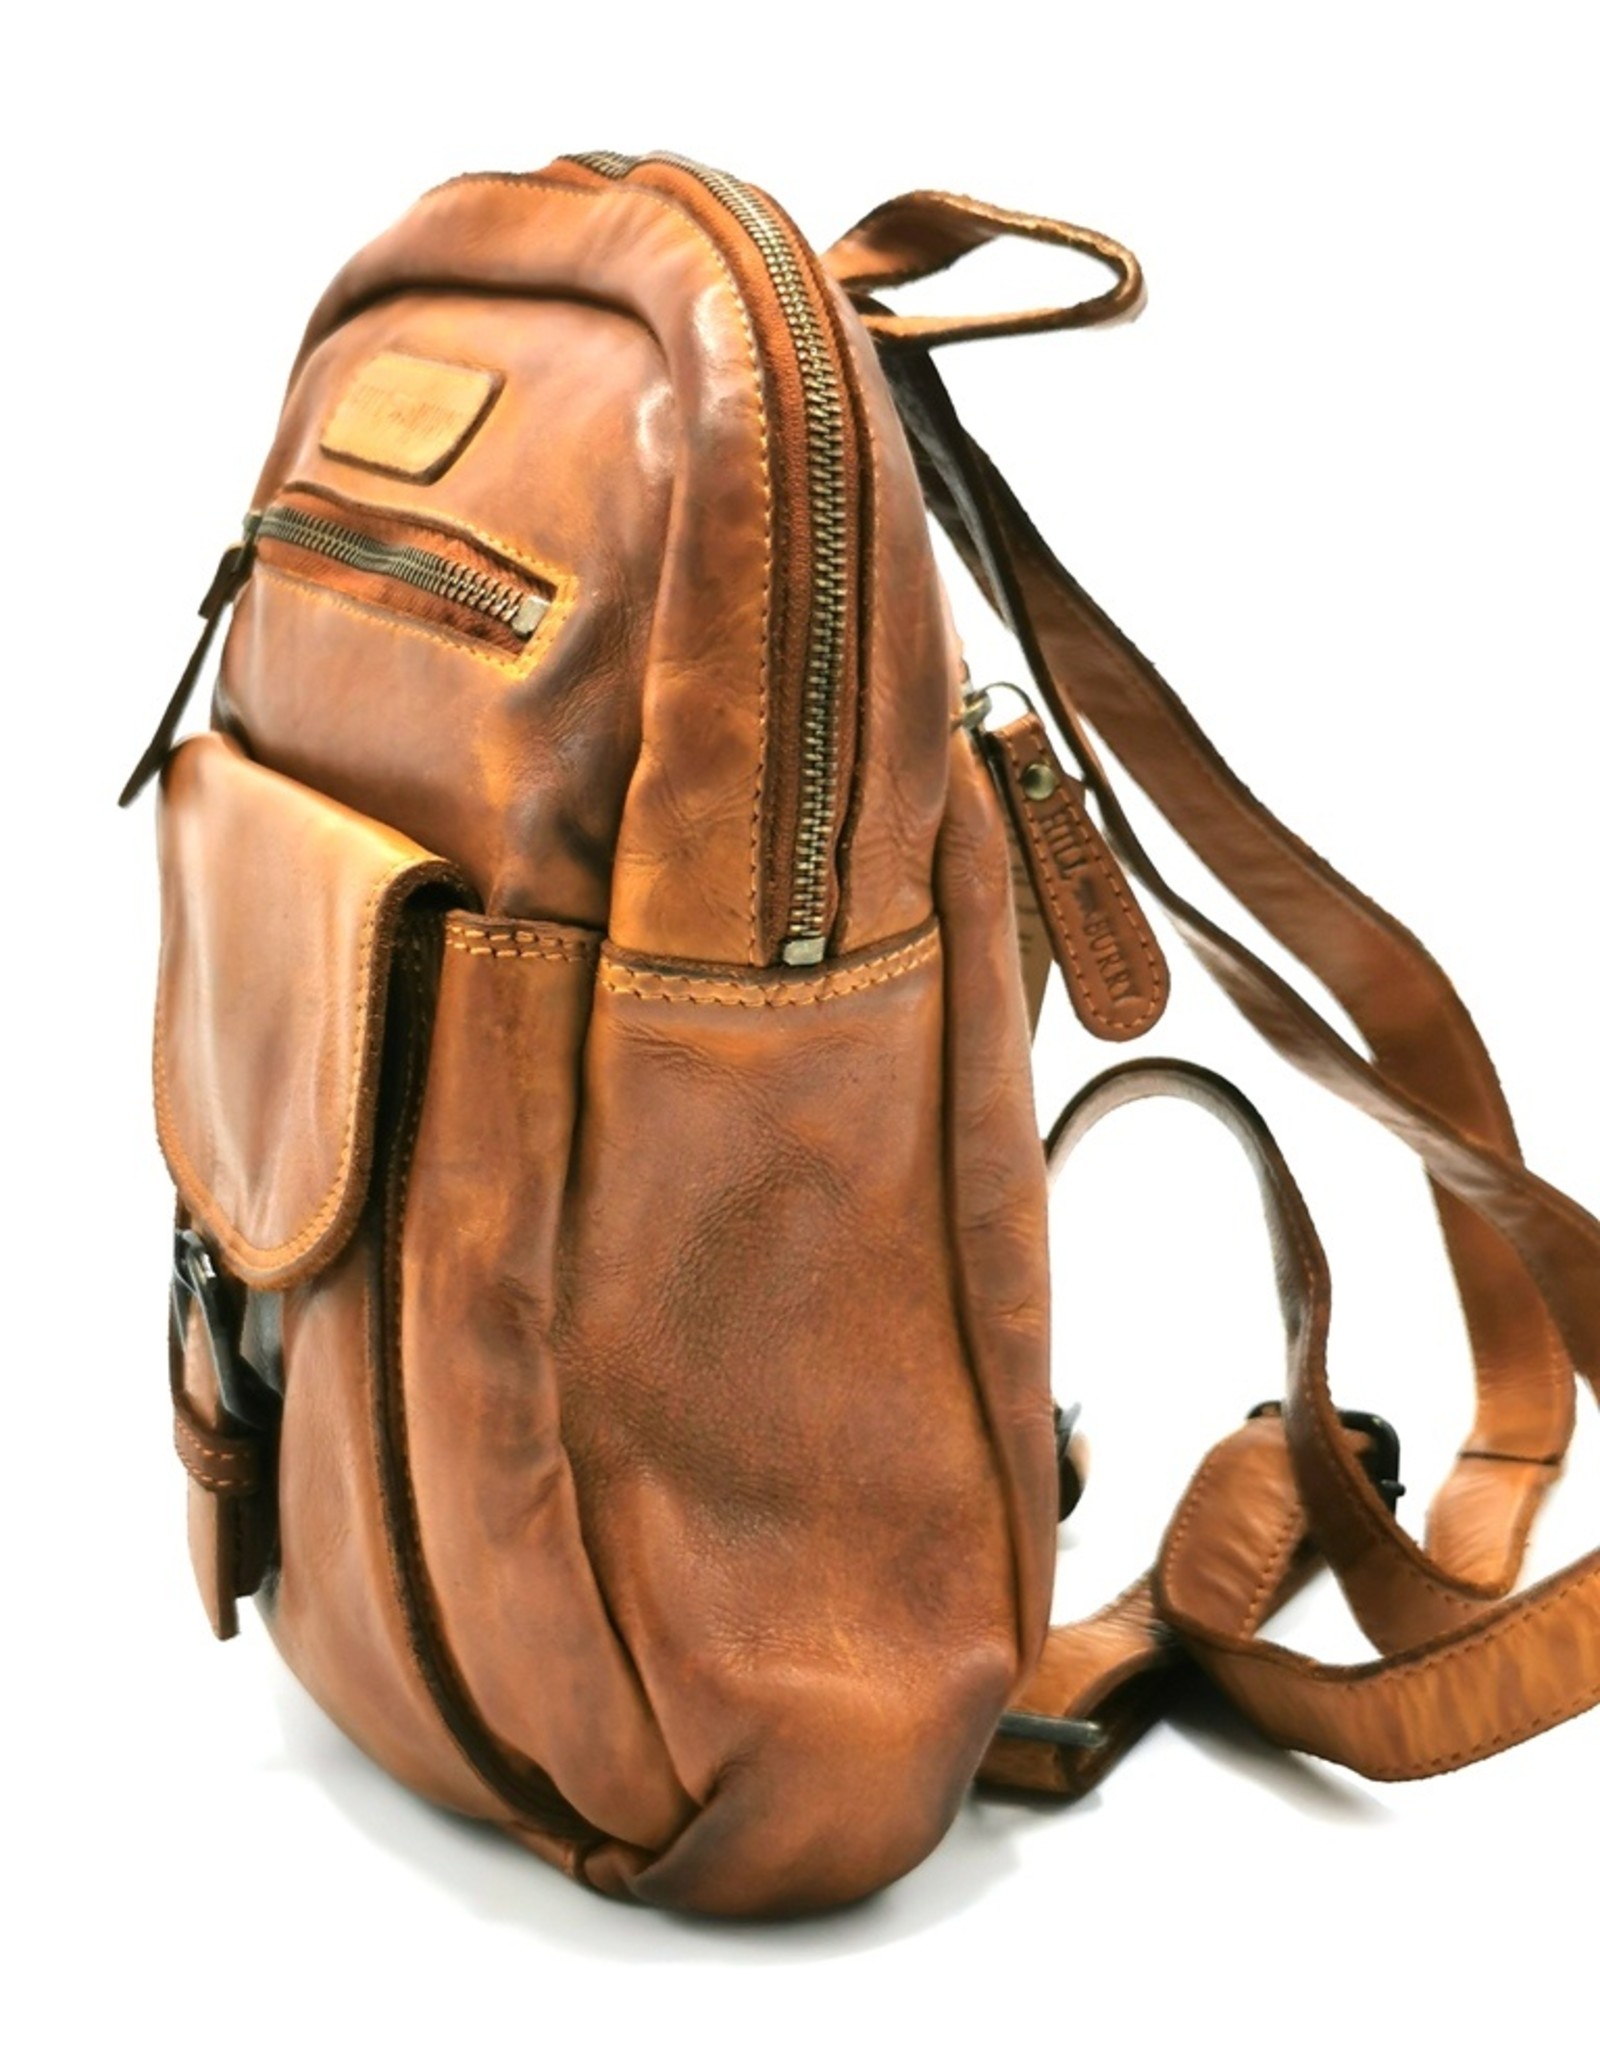 HillBurry Leather backpacks  and leather shoppers -  HillBurry Backpack Washed Leather Cognac